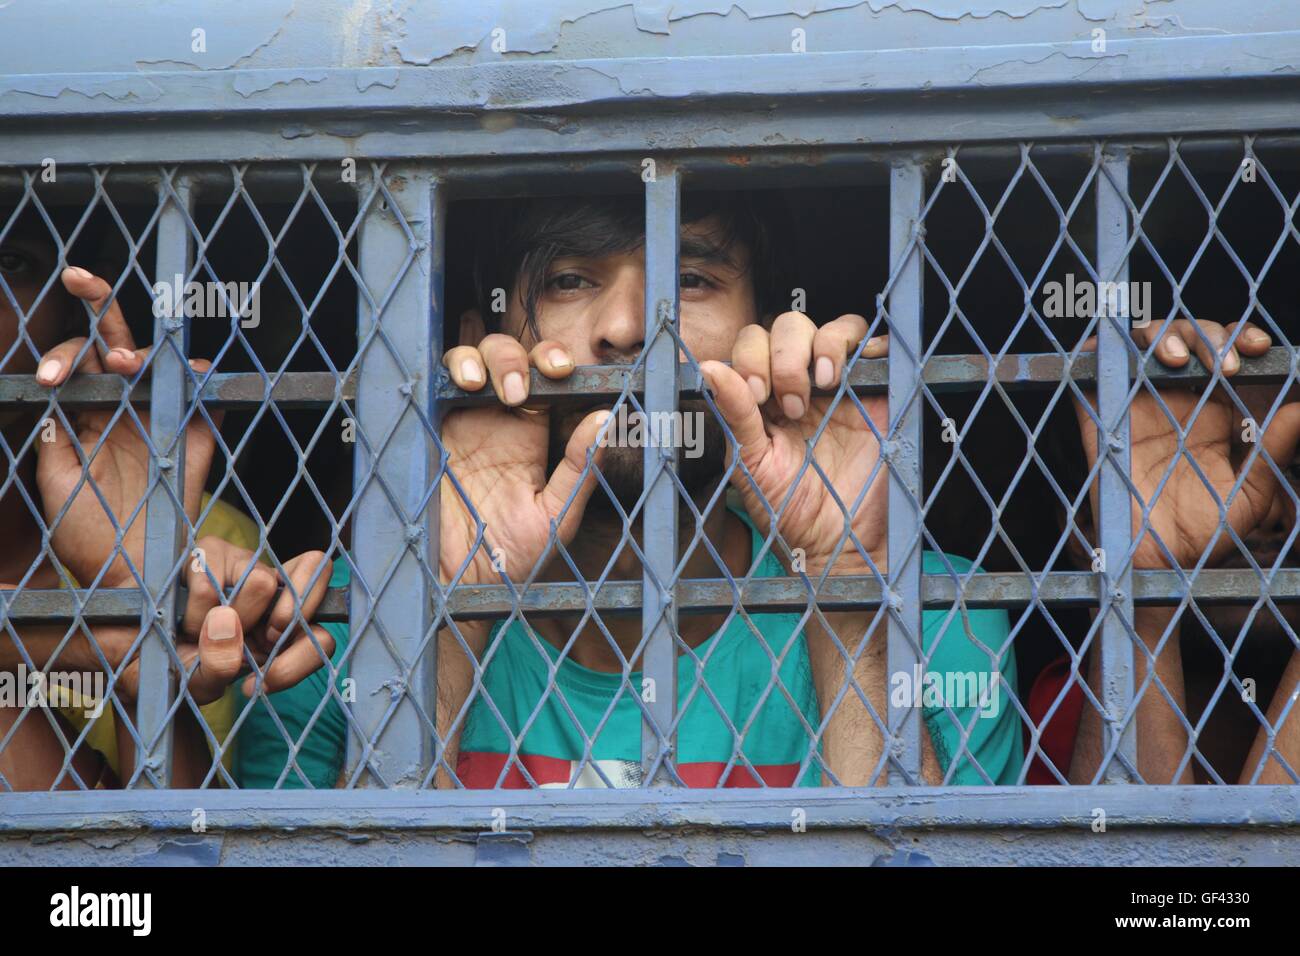 Dhaka, Keranigonj, California, Bangladesh. 29th July, 2016. A prisoners look through from the prison van as the shifting of prisoners from the 200-year-old Dhaka Central Jail to the newly built prison at Rajendrapur, in Keraniganj, has started on 29 July, 2016, Dhaka, Bangladesh. The new prison at Rajendrapur is located 12 kilometres away from the old one built in 1788 on Nazim Uddin Road. According to the local media report Prison authorities say the Dhaka Central Jail housed nearly 8,000 prisoners, 6,300 of them male, and the rest female inmates. The women prisoners were earlier shifted to Stock Photo